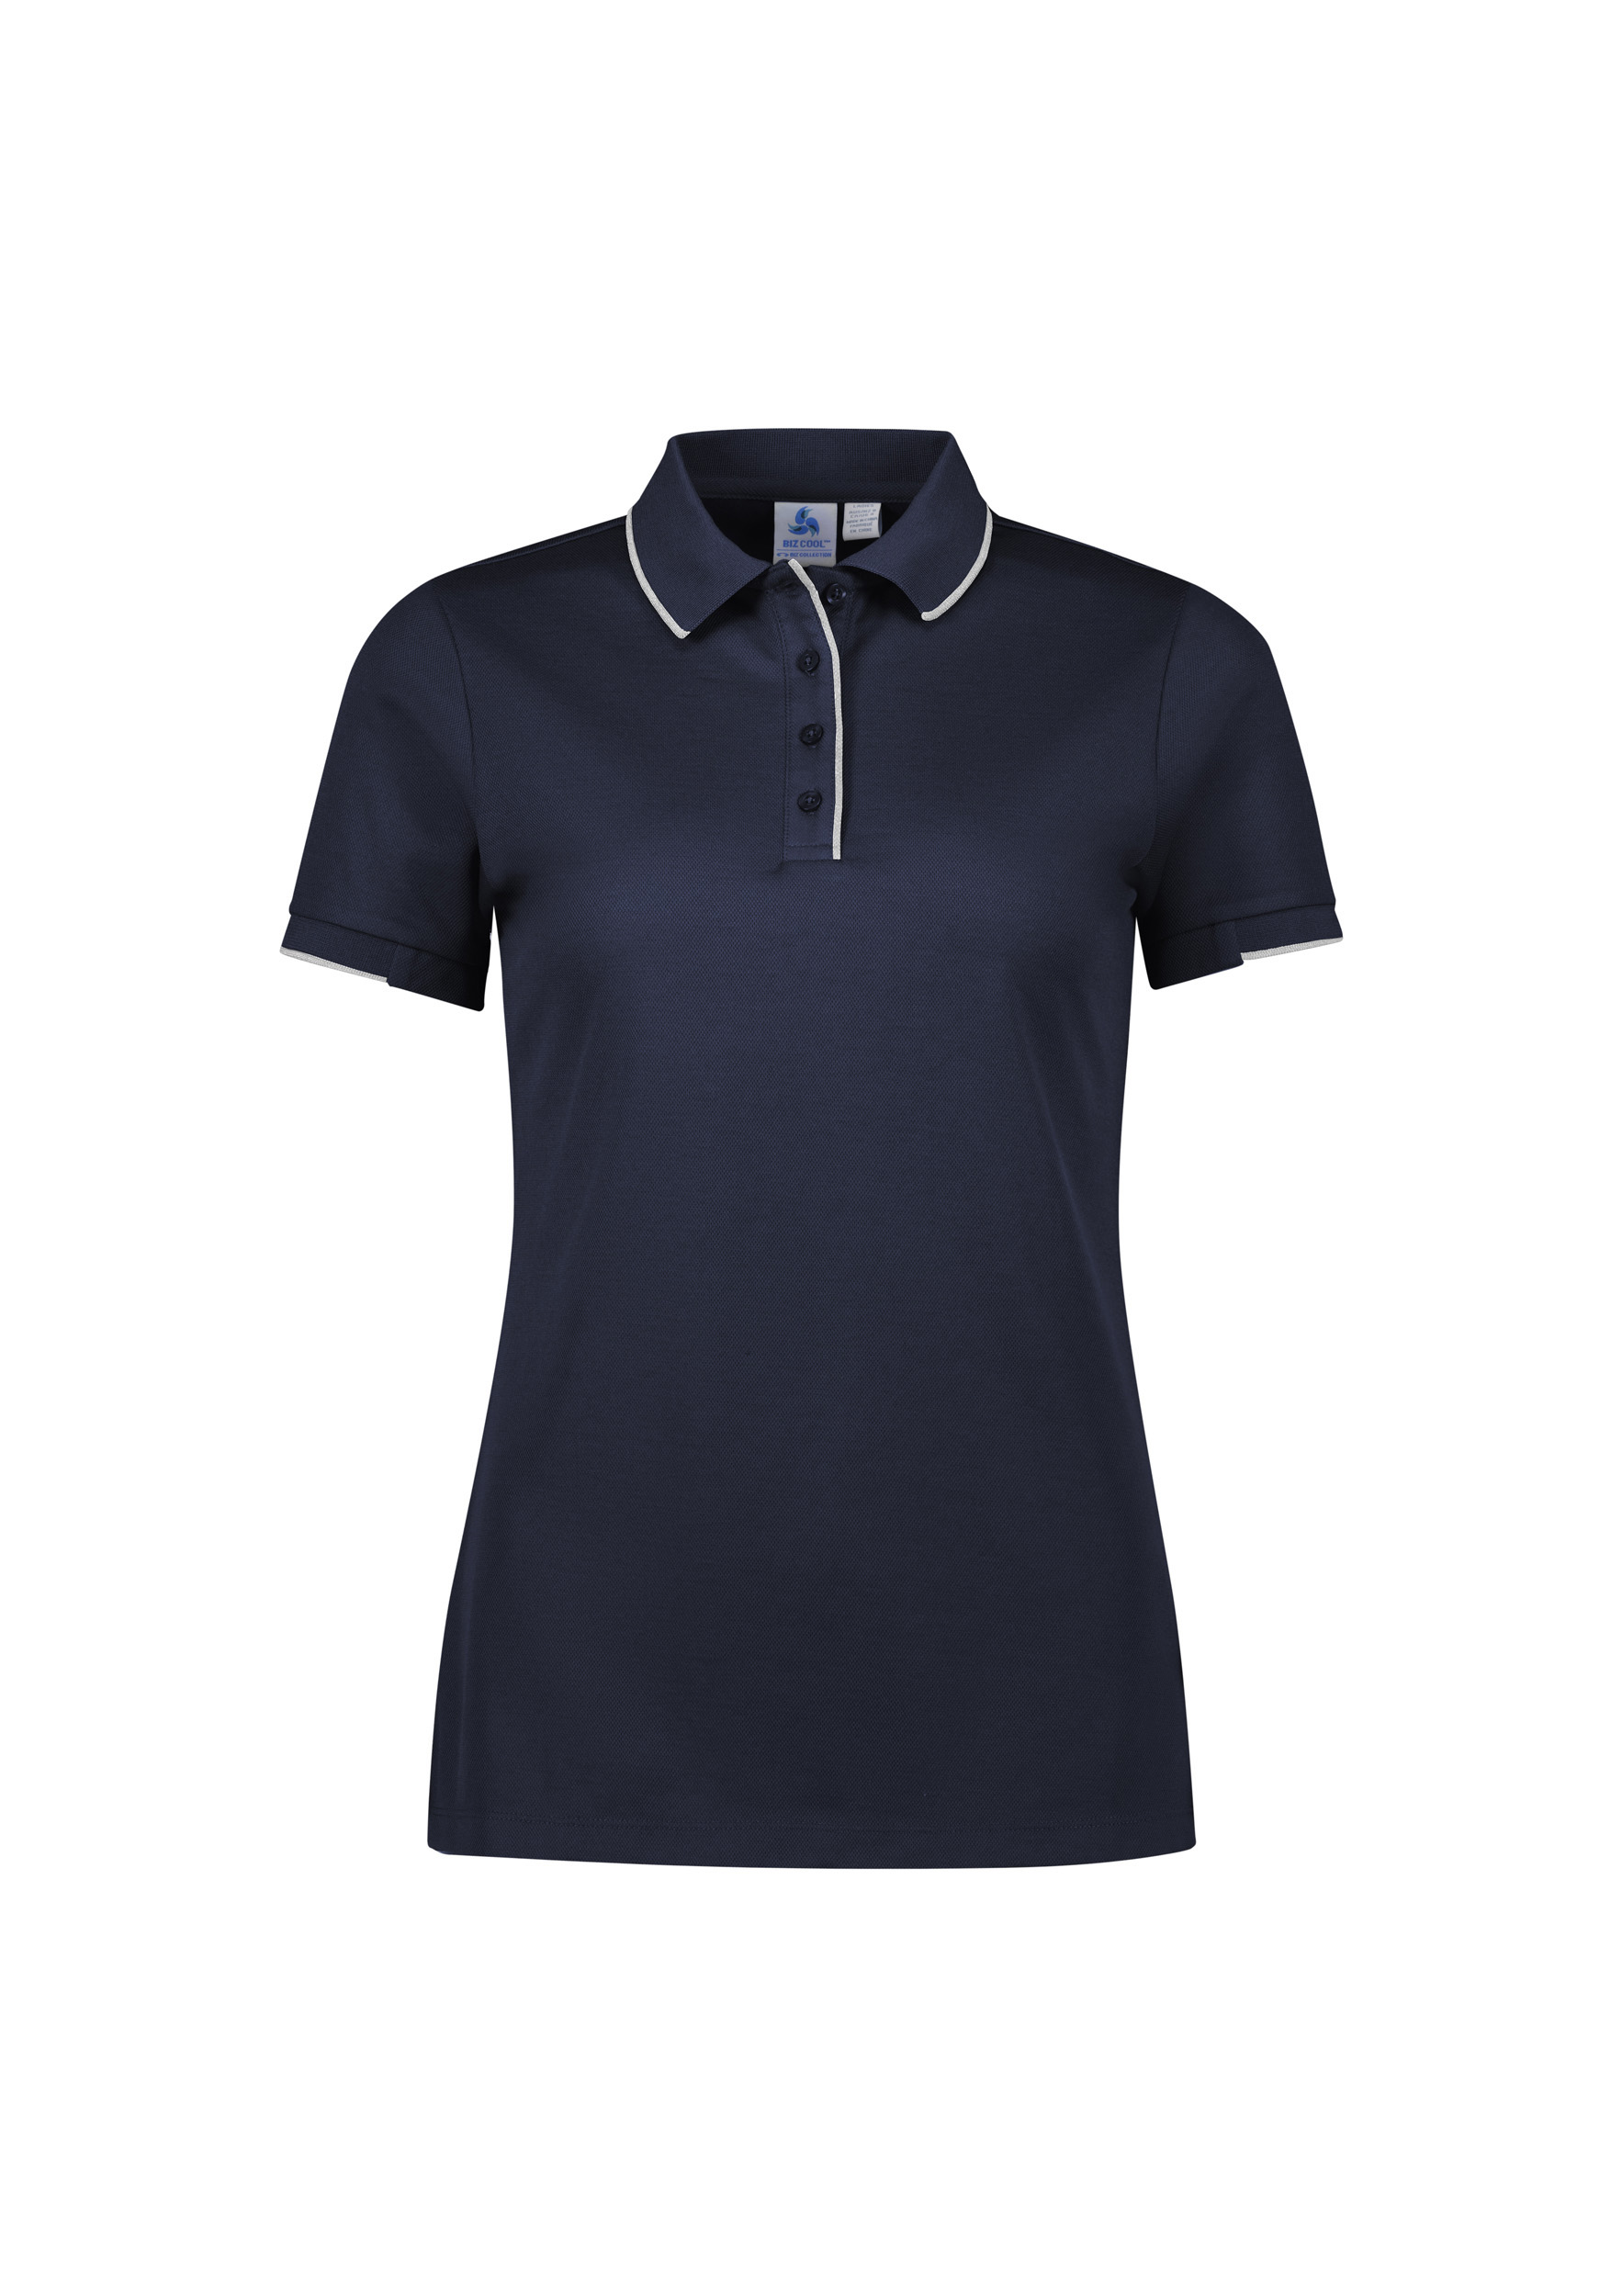 WOMENS FOCUS POLO NAVY/WHT 10 80% POLY, 20% COTTON-BACK 185GSM